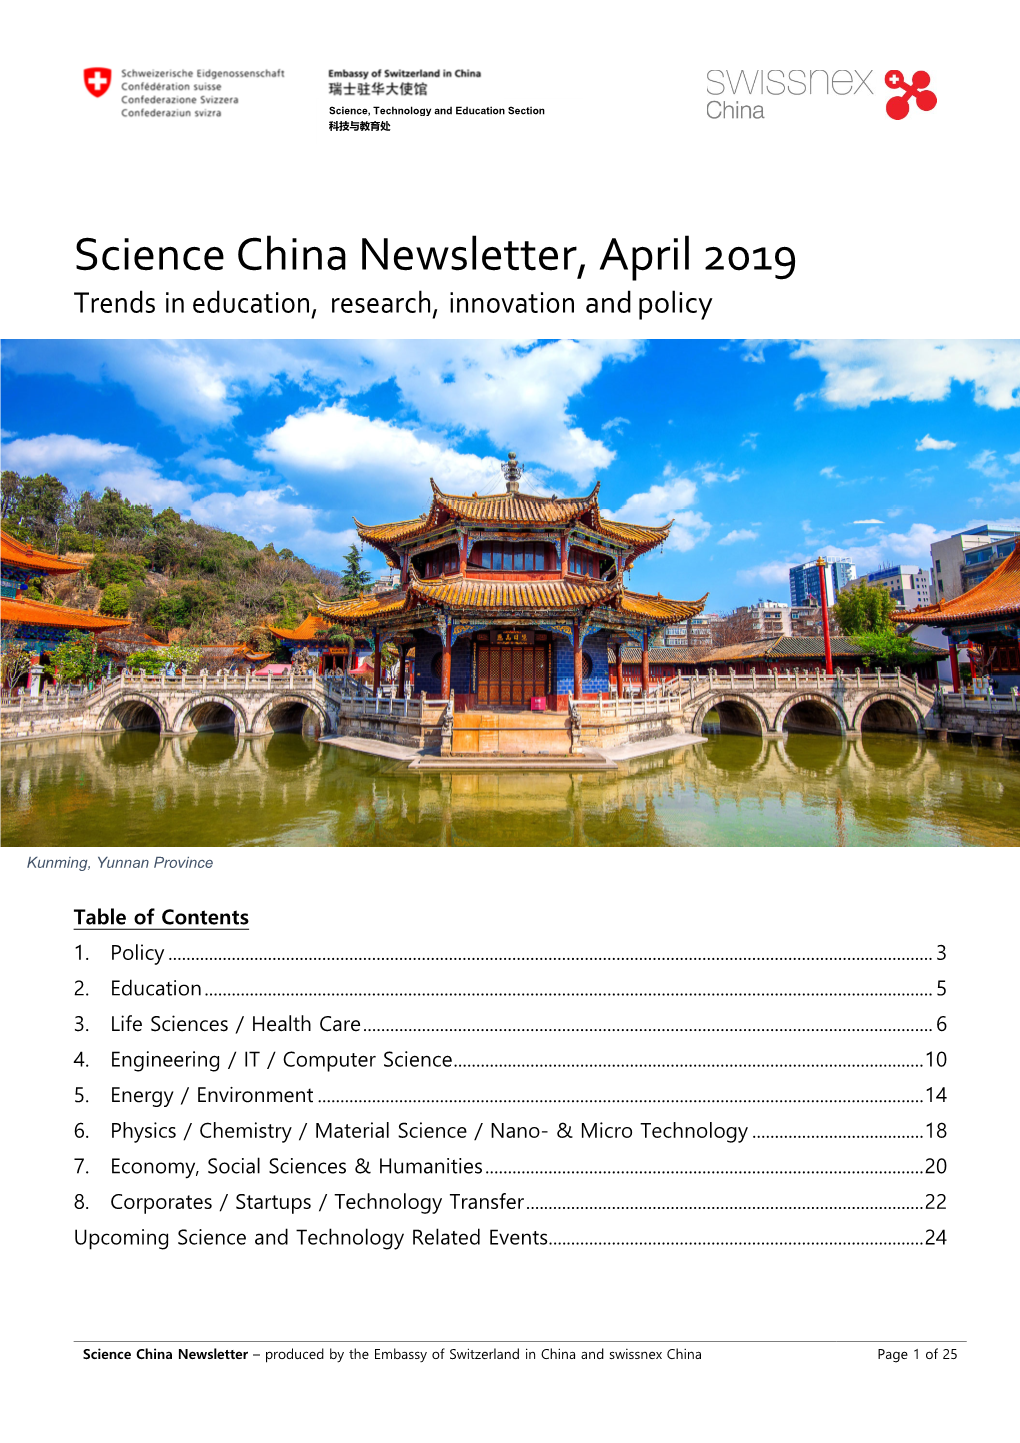 Science China Newsletter, April 2019 Trends in Education, Research, Innovation and Policy